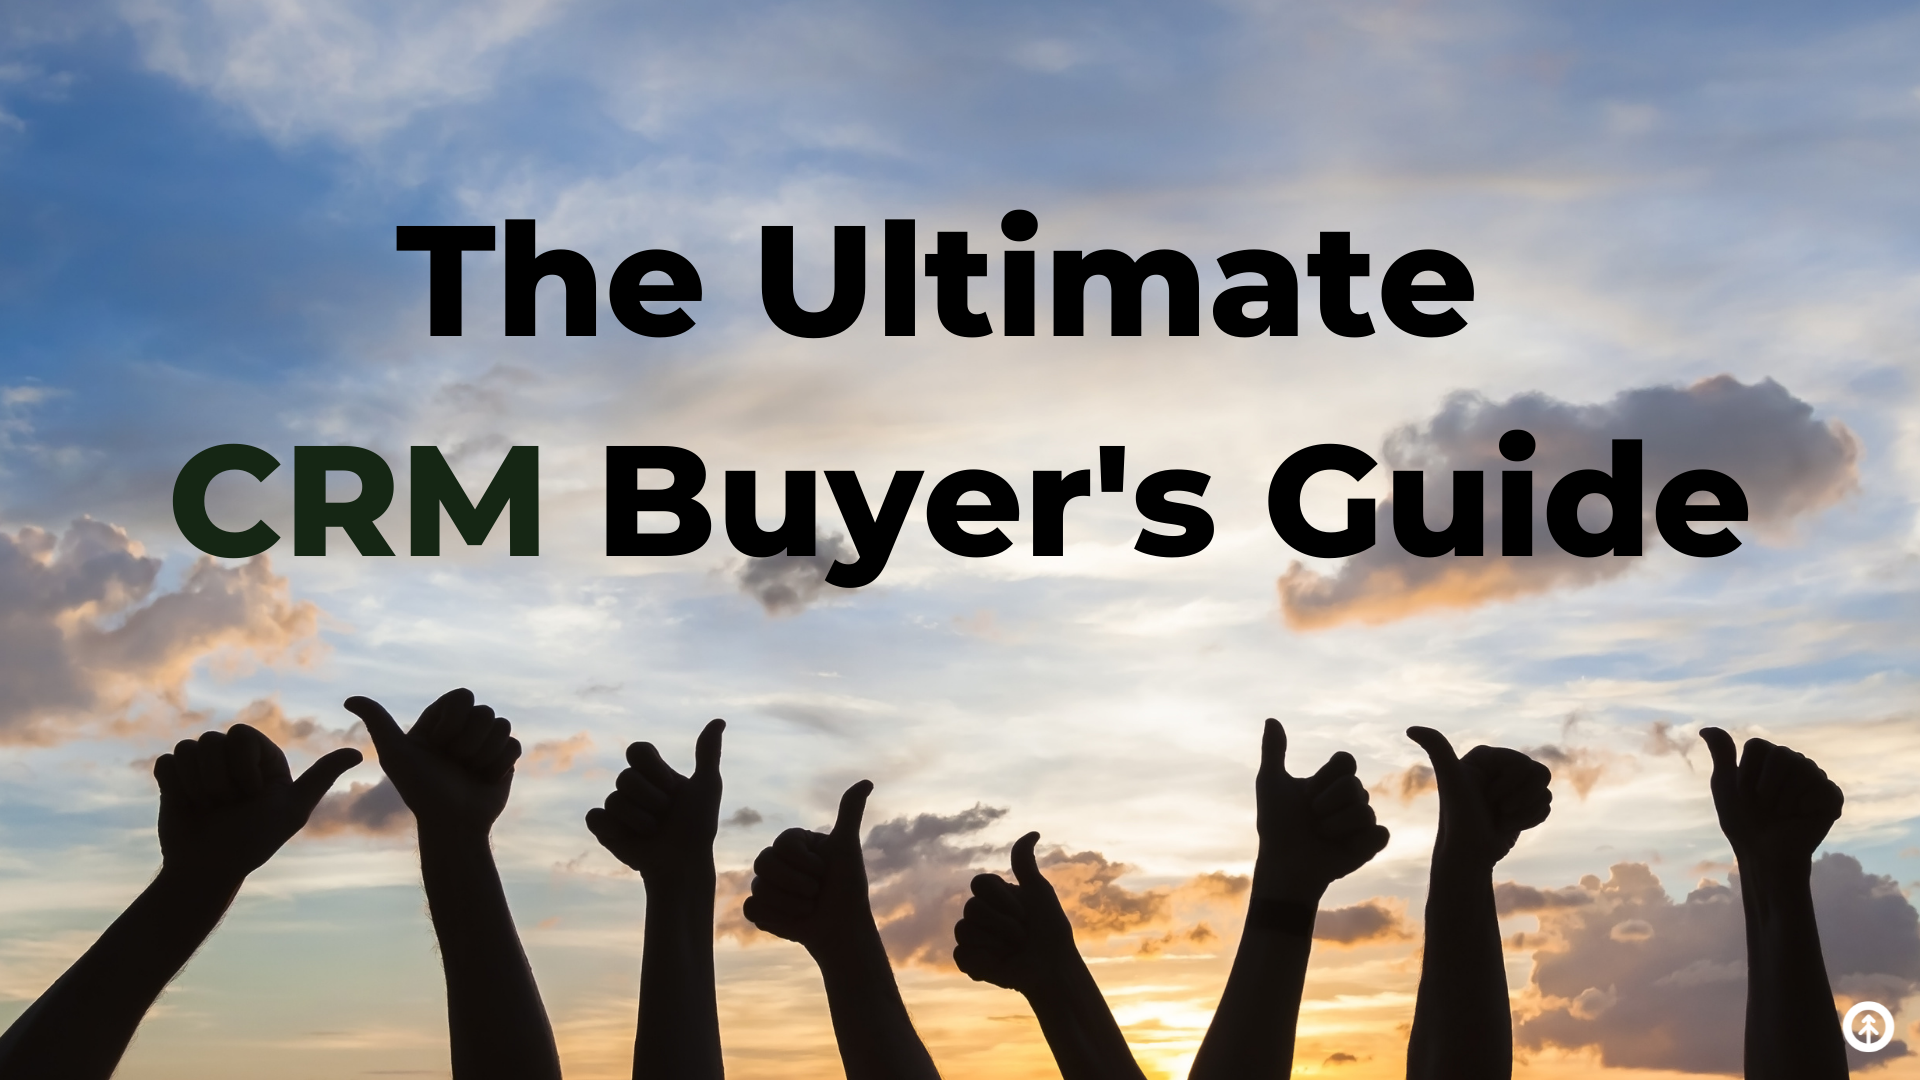 The Ultimate CRM Buyer's Guide